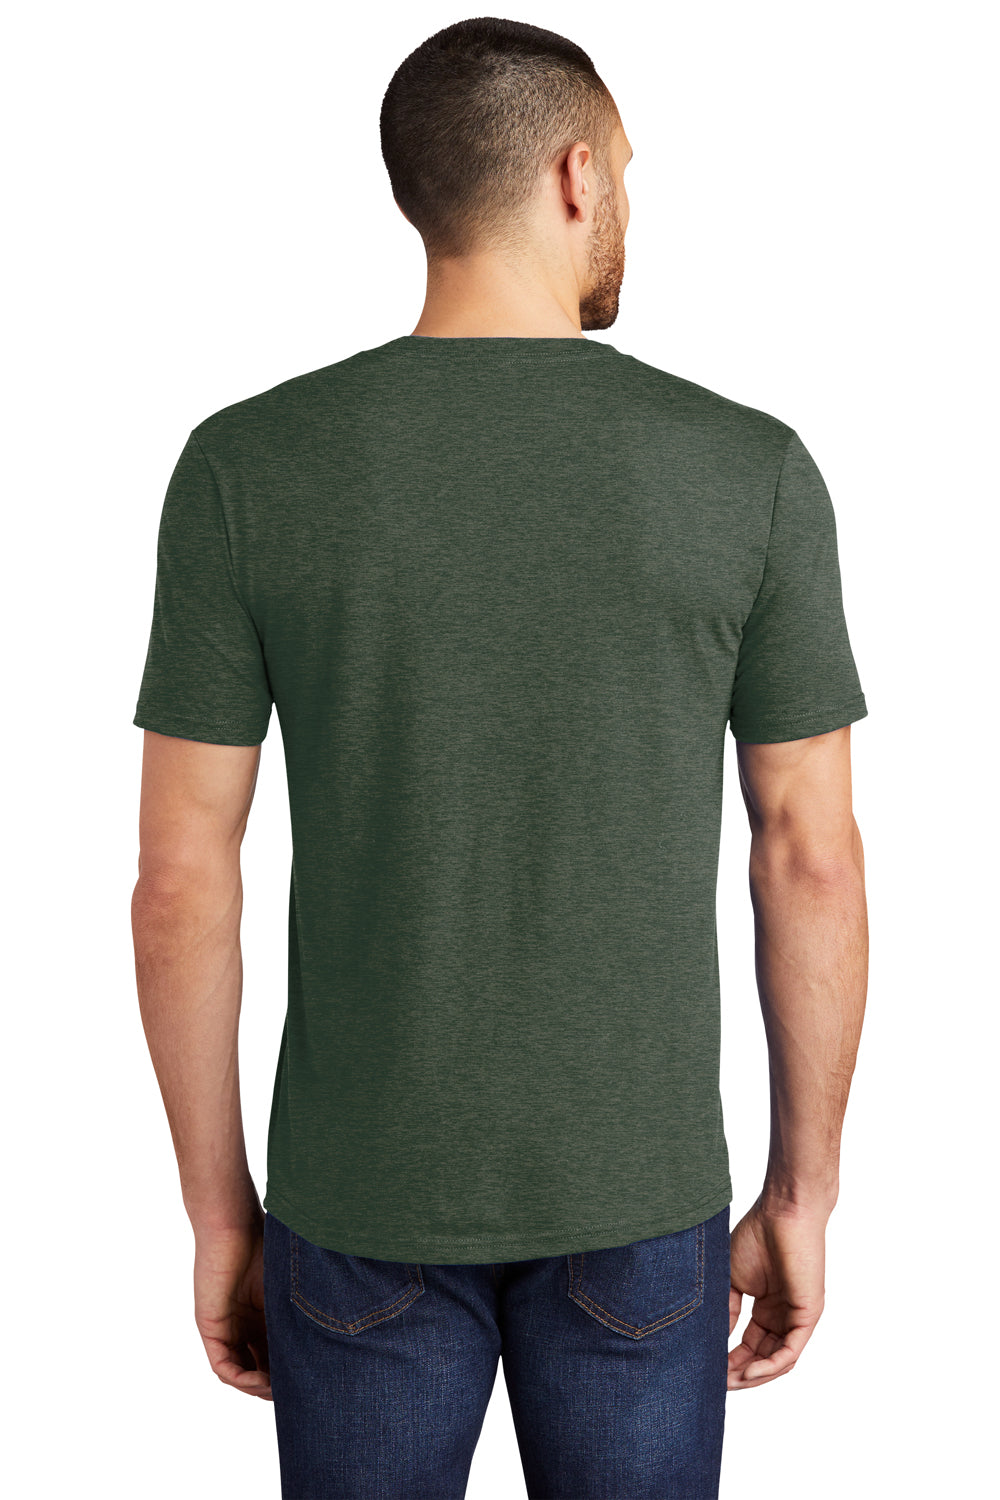 District Mens Perfect Tri Short Sleeve Crewneck T-Shirt Heather Forest Green Back